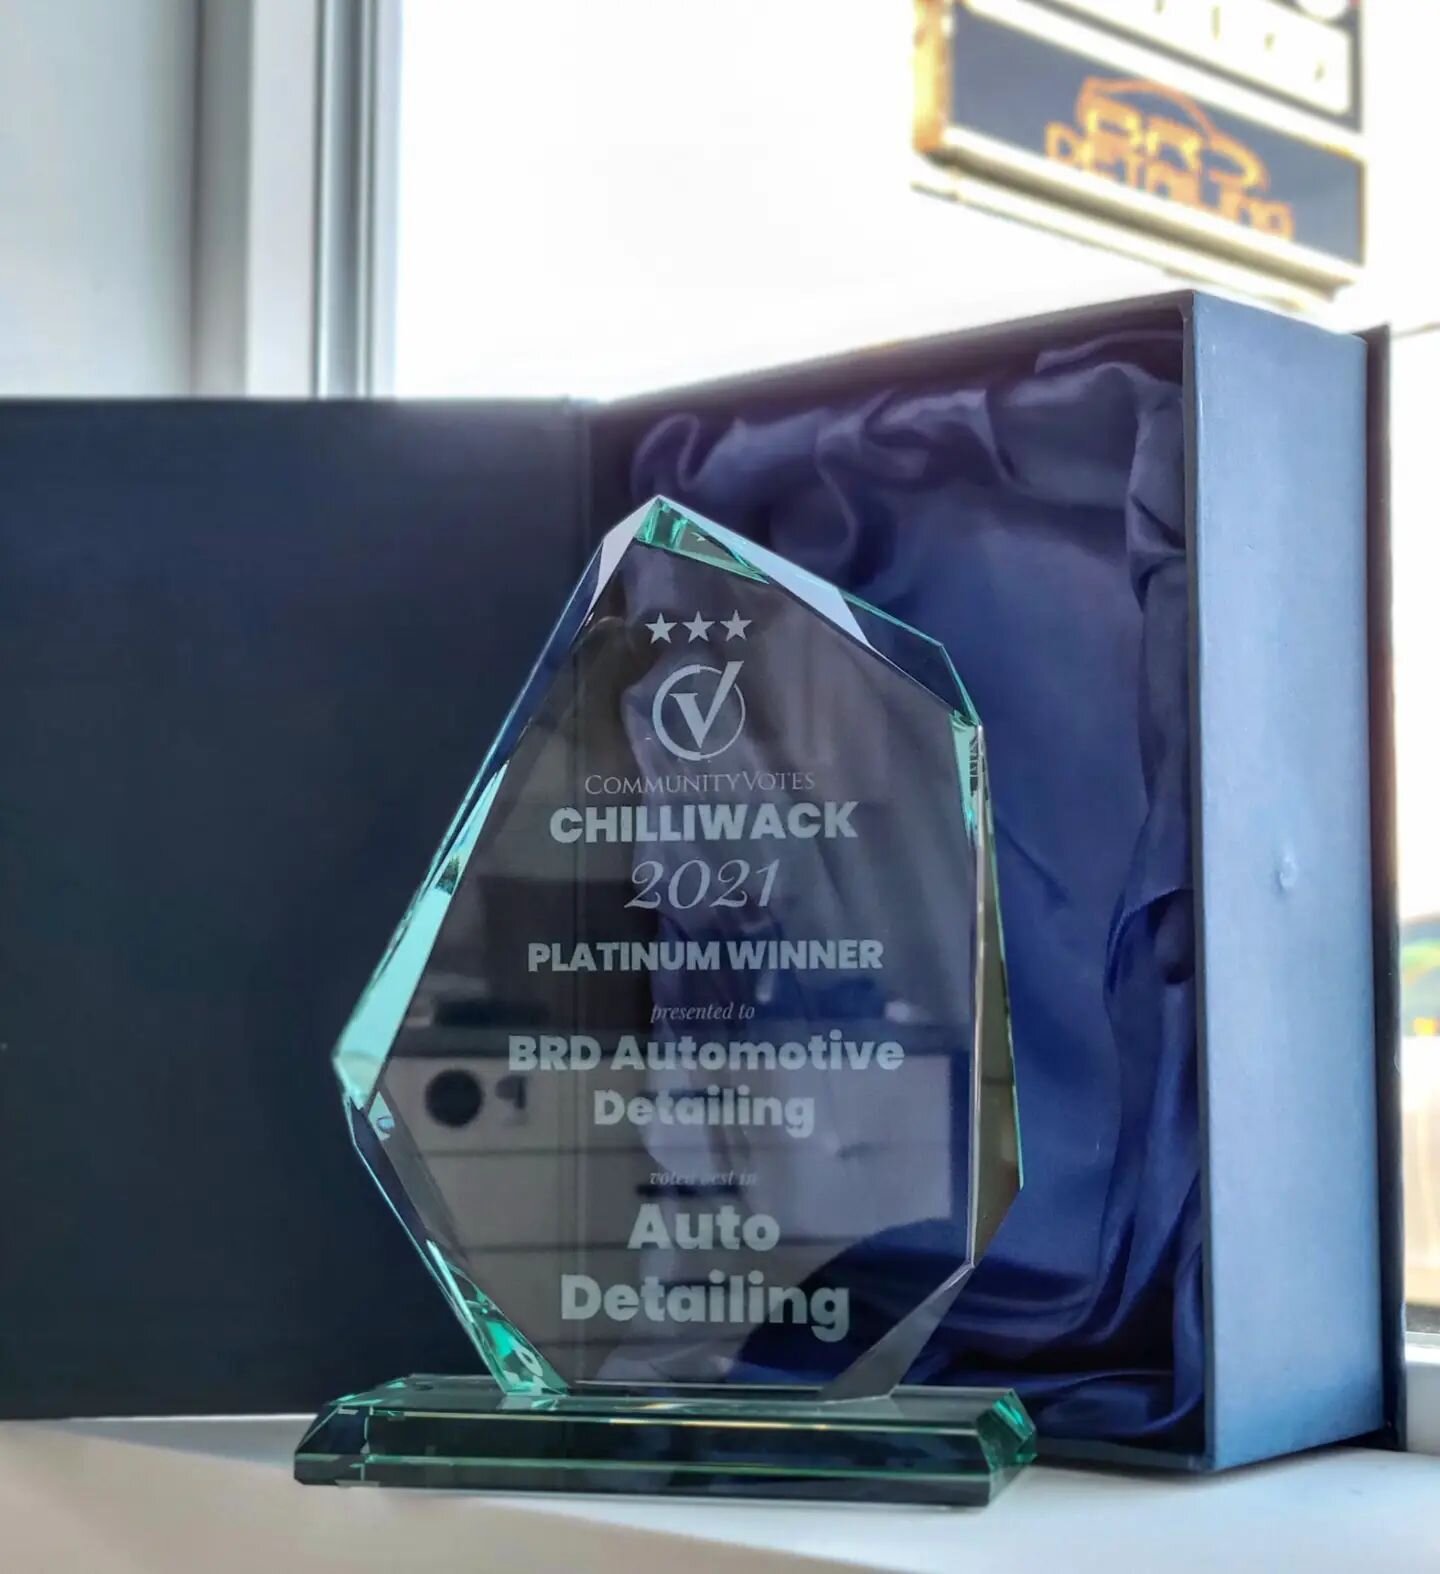 THANK YOU Chilliwack, we are thrilled to be the Platinum Winner in Auto Detailing!